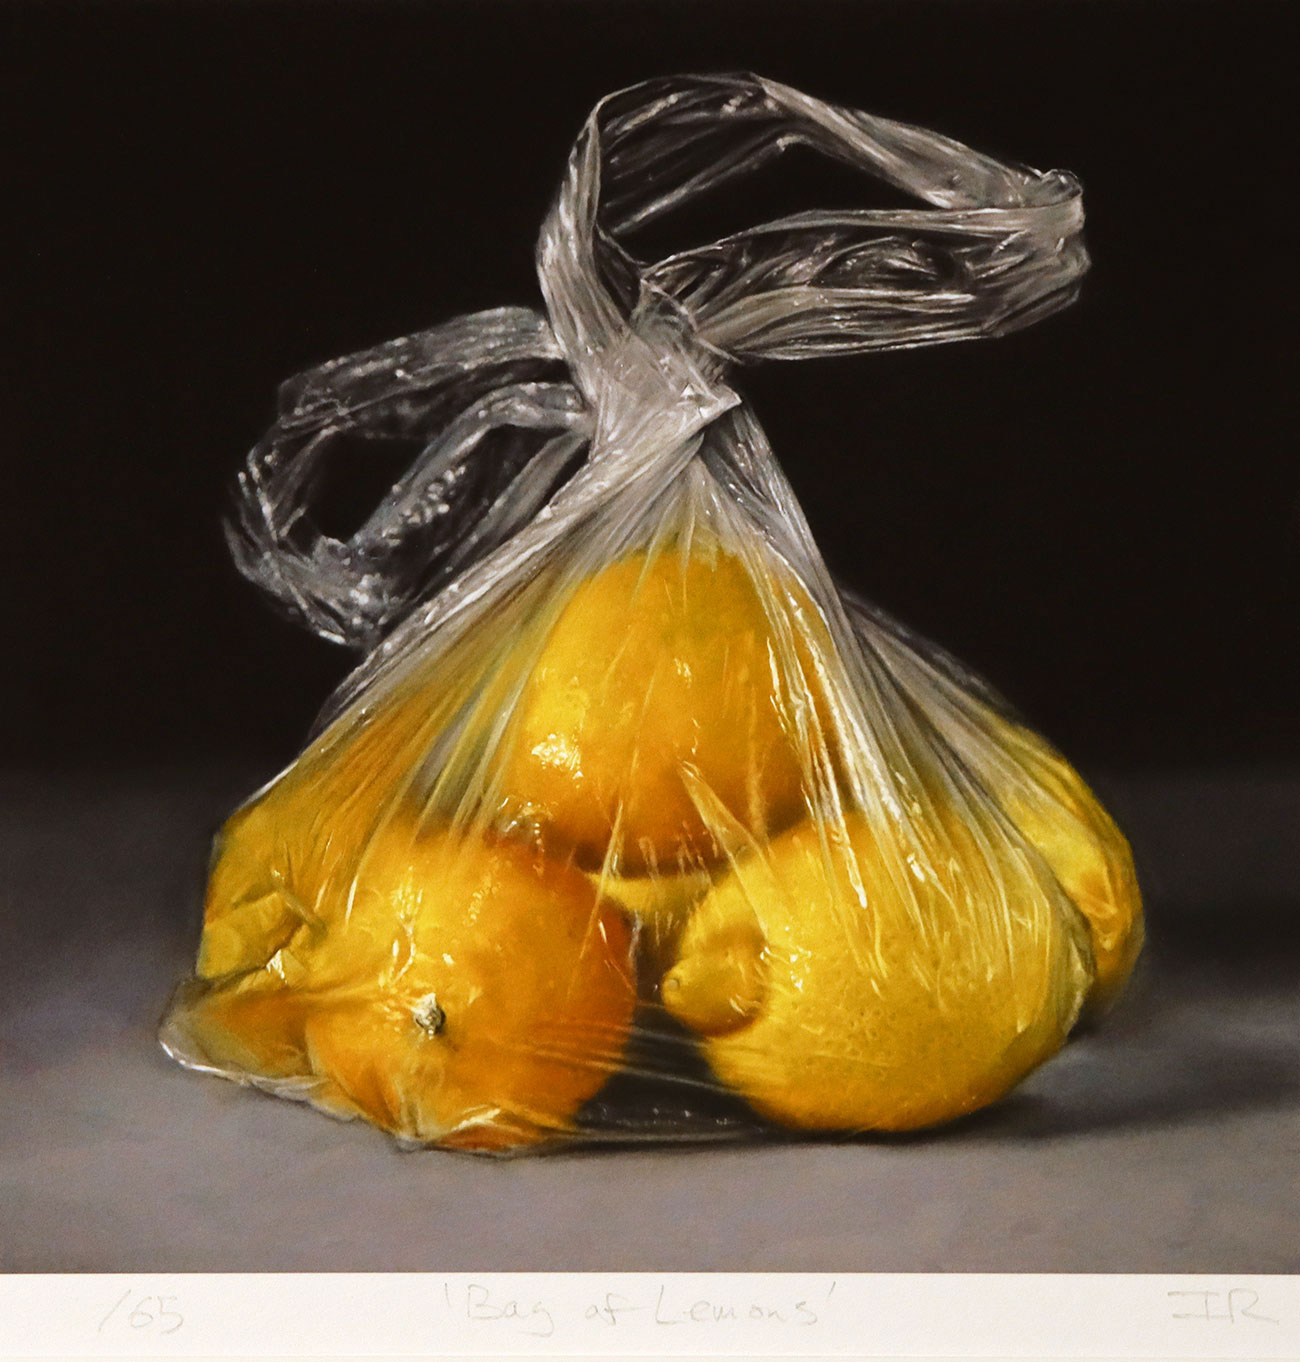 Ian Rawling, Signed limited edition print, Bag of Lemons. Click to enlarge